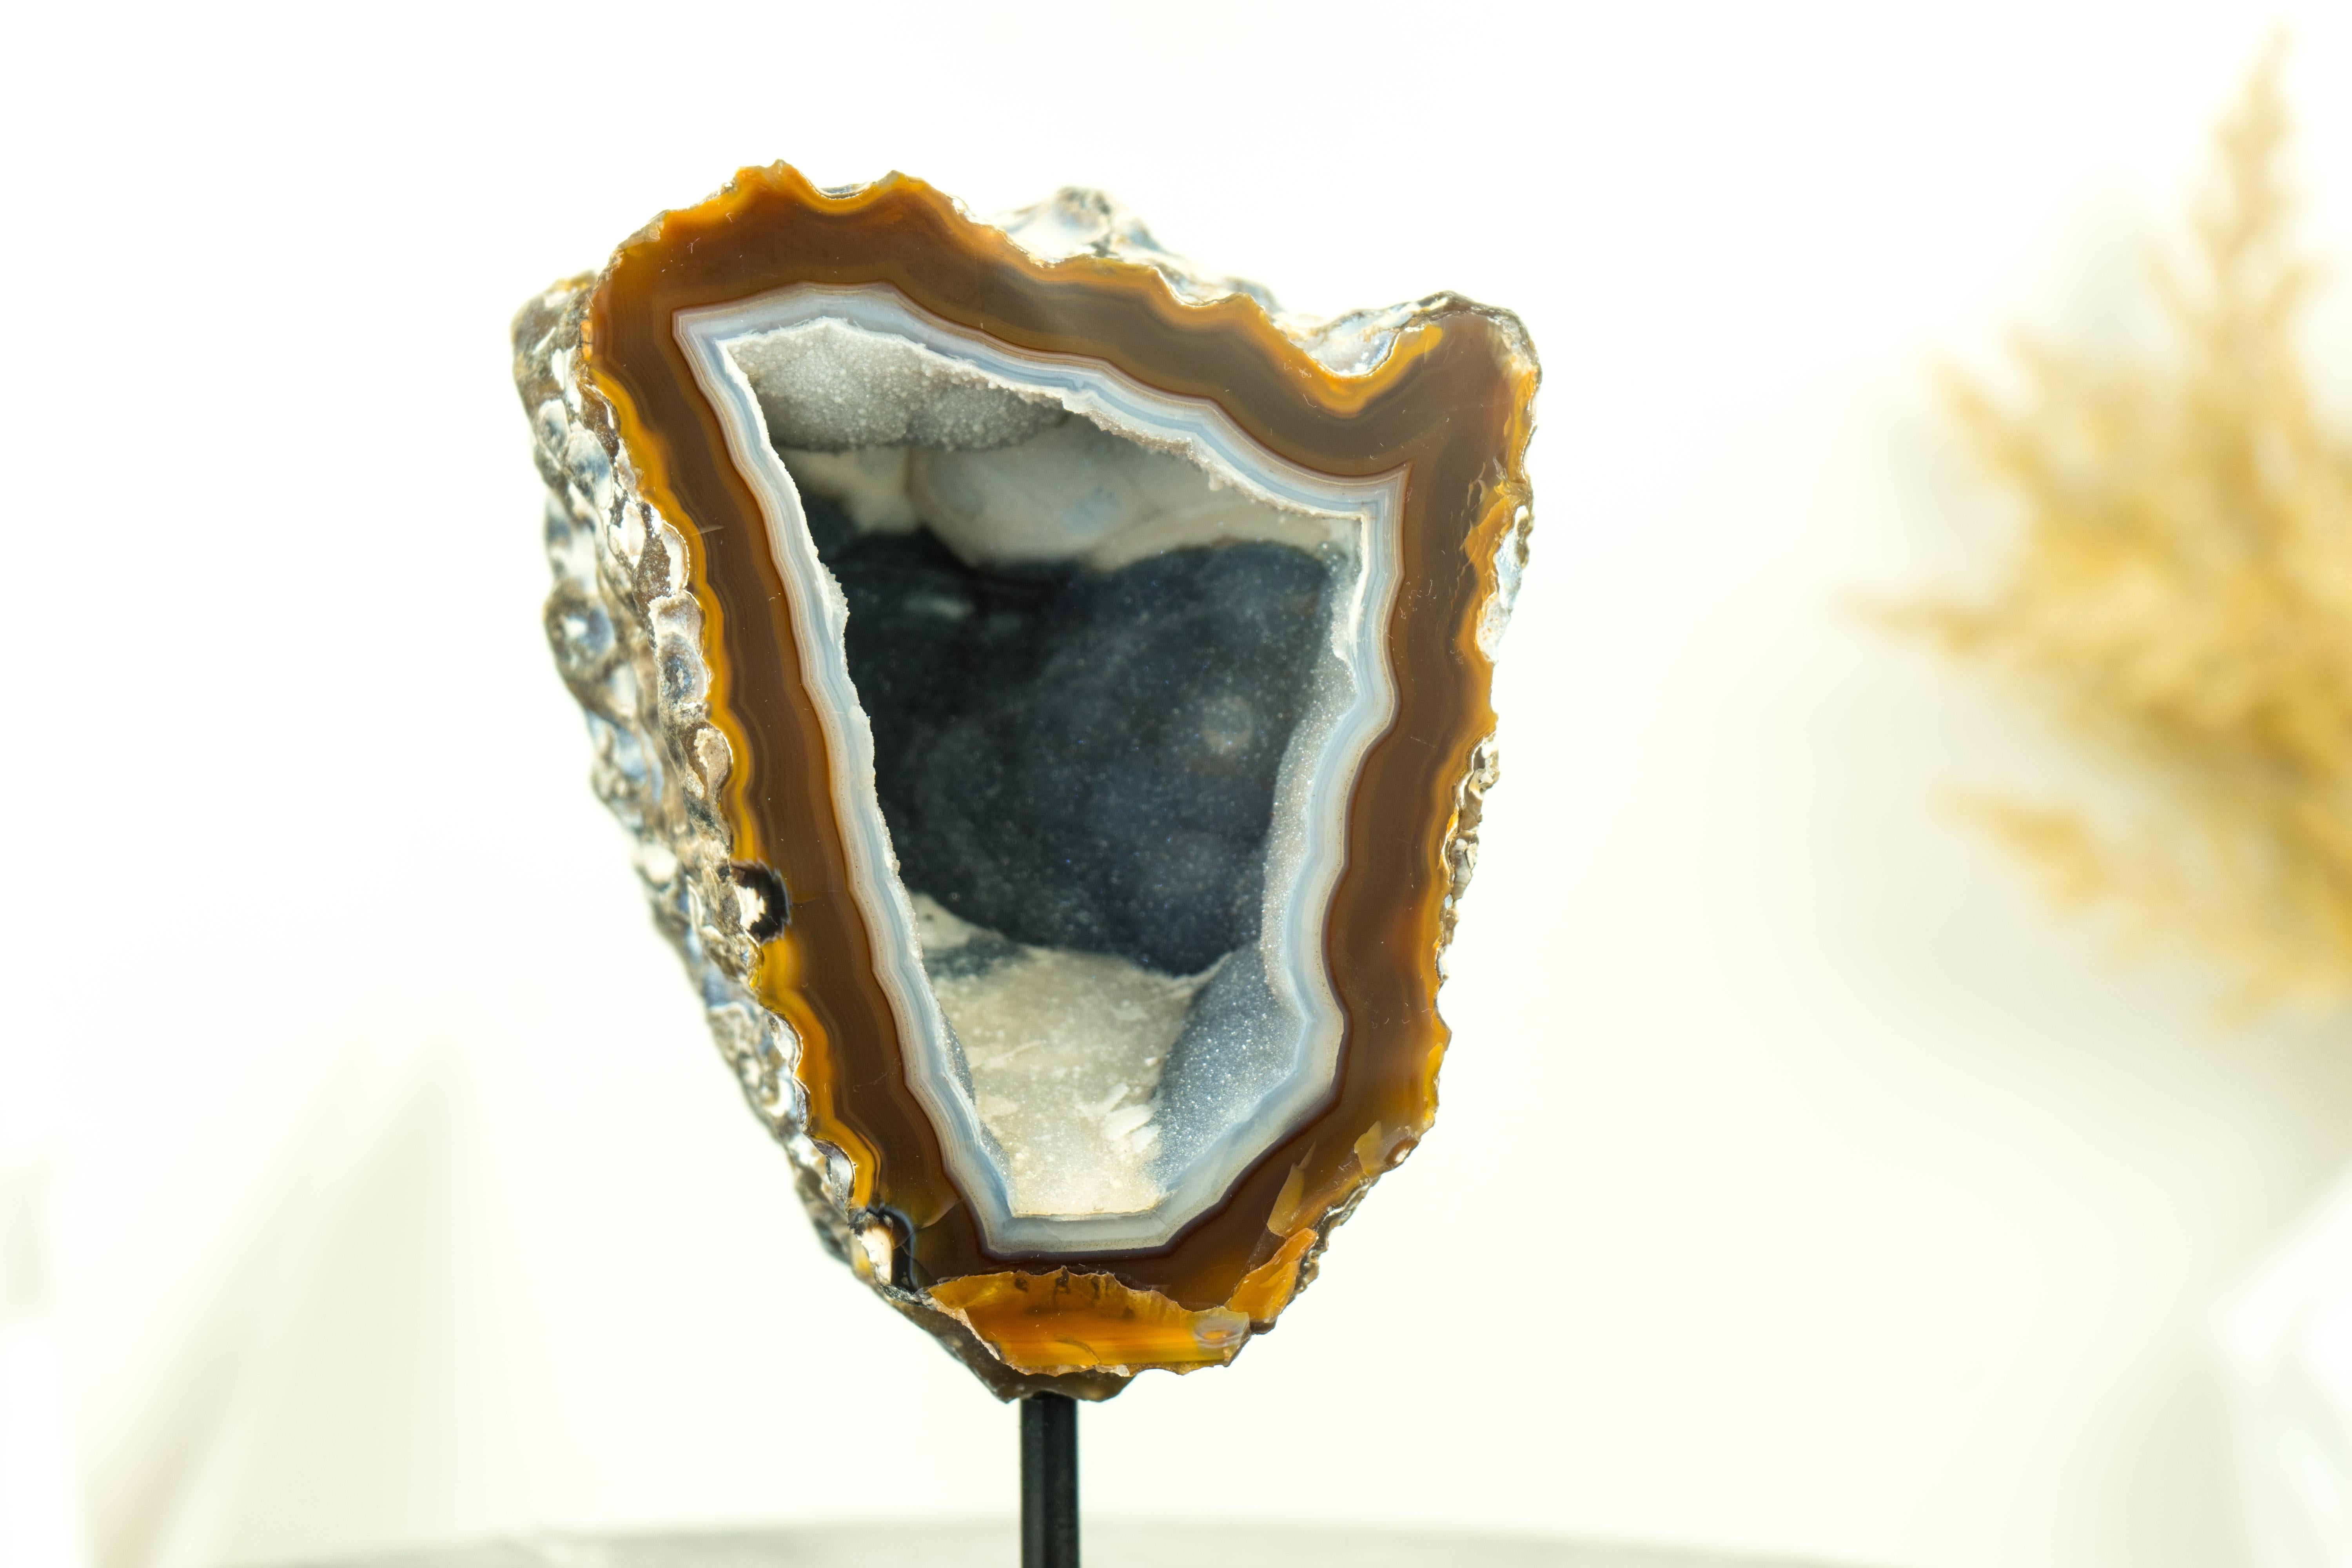 Gallery Grade Amber and White Lace Agate Geode with Blue Galaxy Druzy For Sale 7